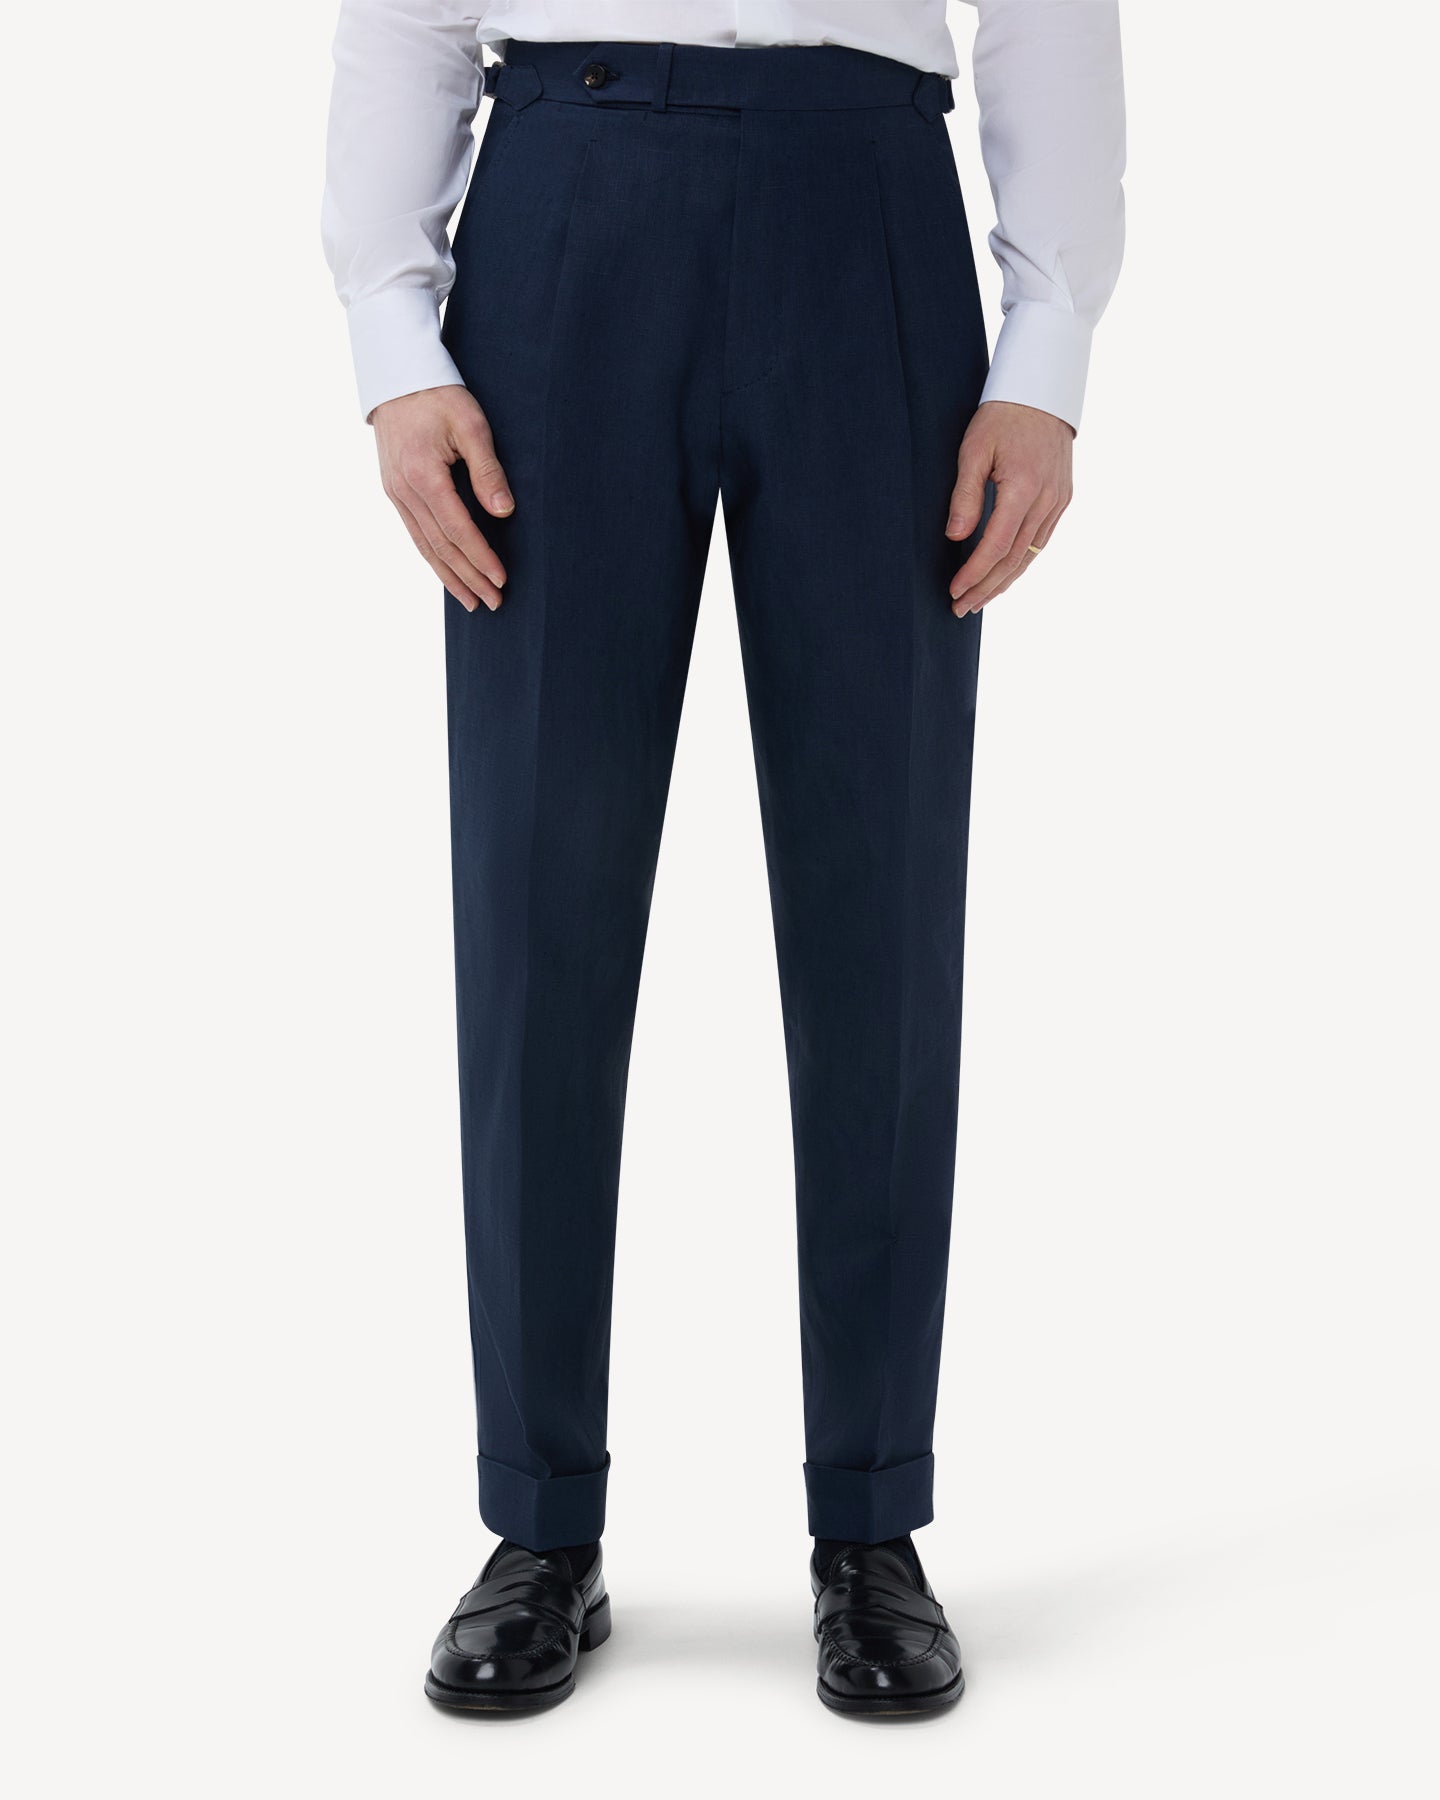 The front of navy linen trousers with single pleats and side adjusters